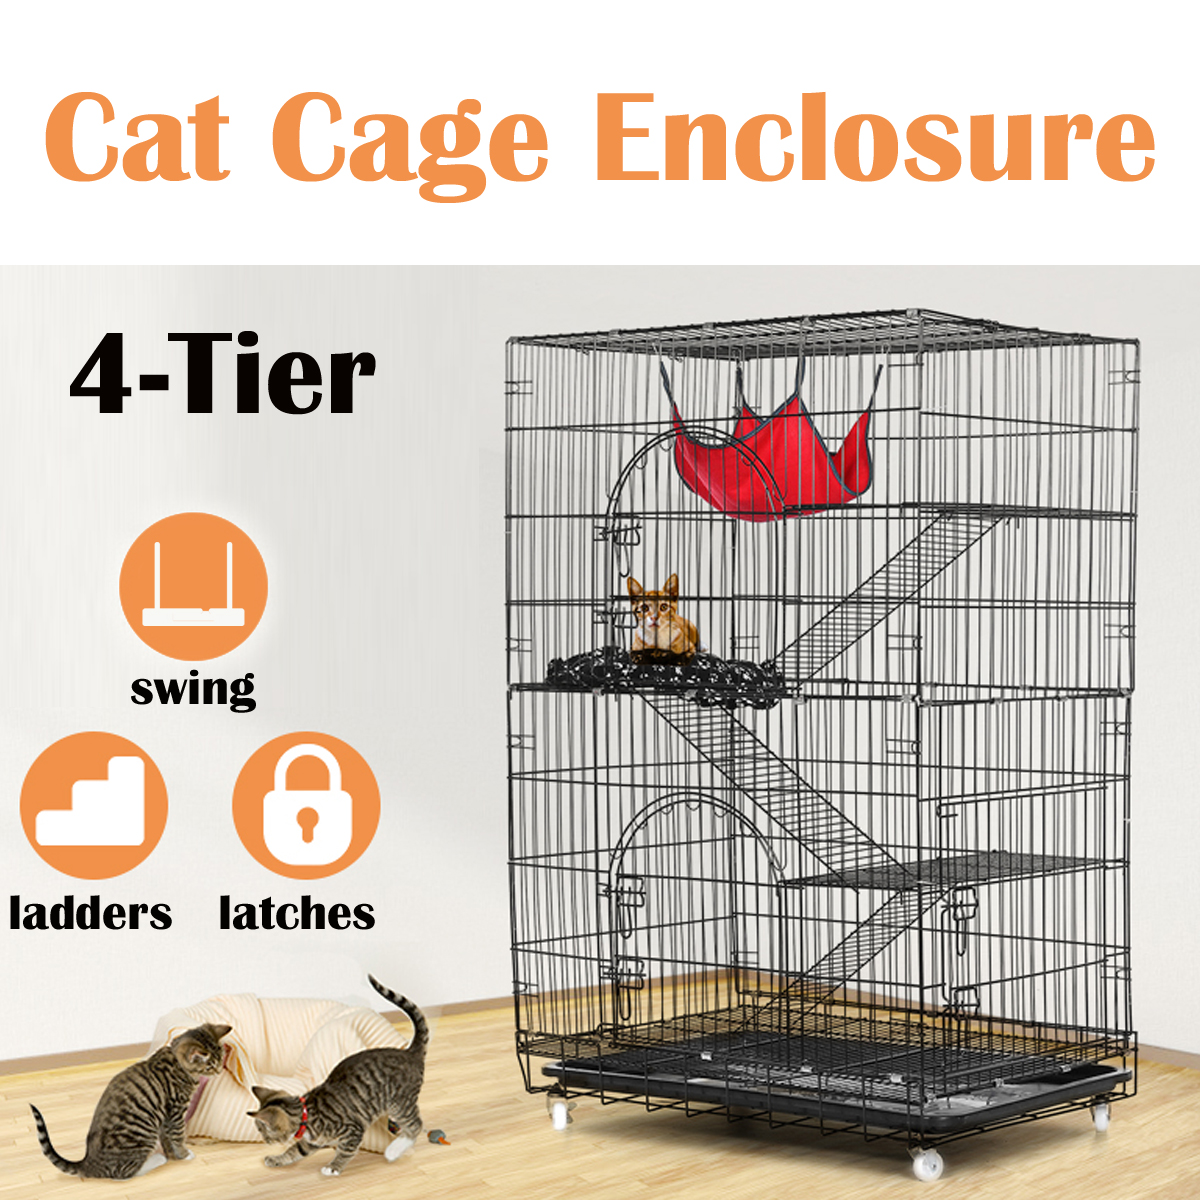 Catio Furniture Ideas For Making Your Catio Super Pretty • Kritter Kommunity